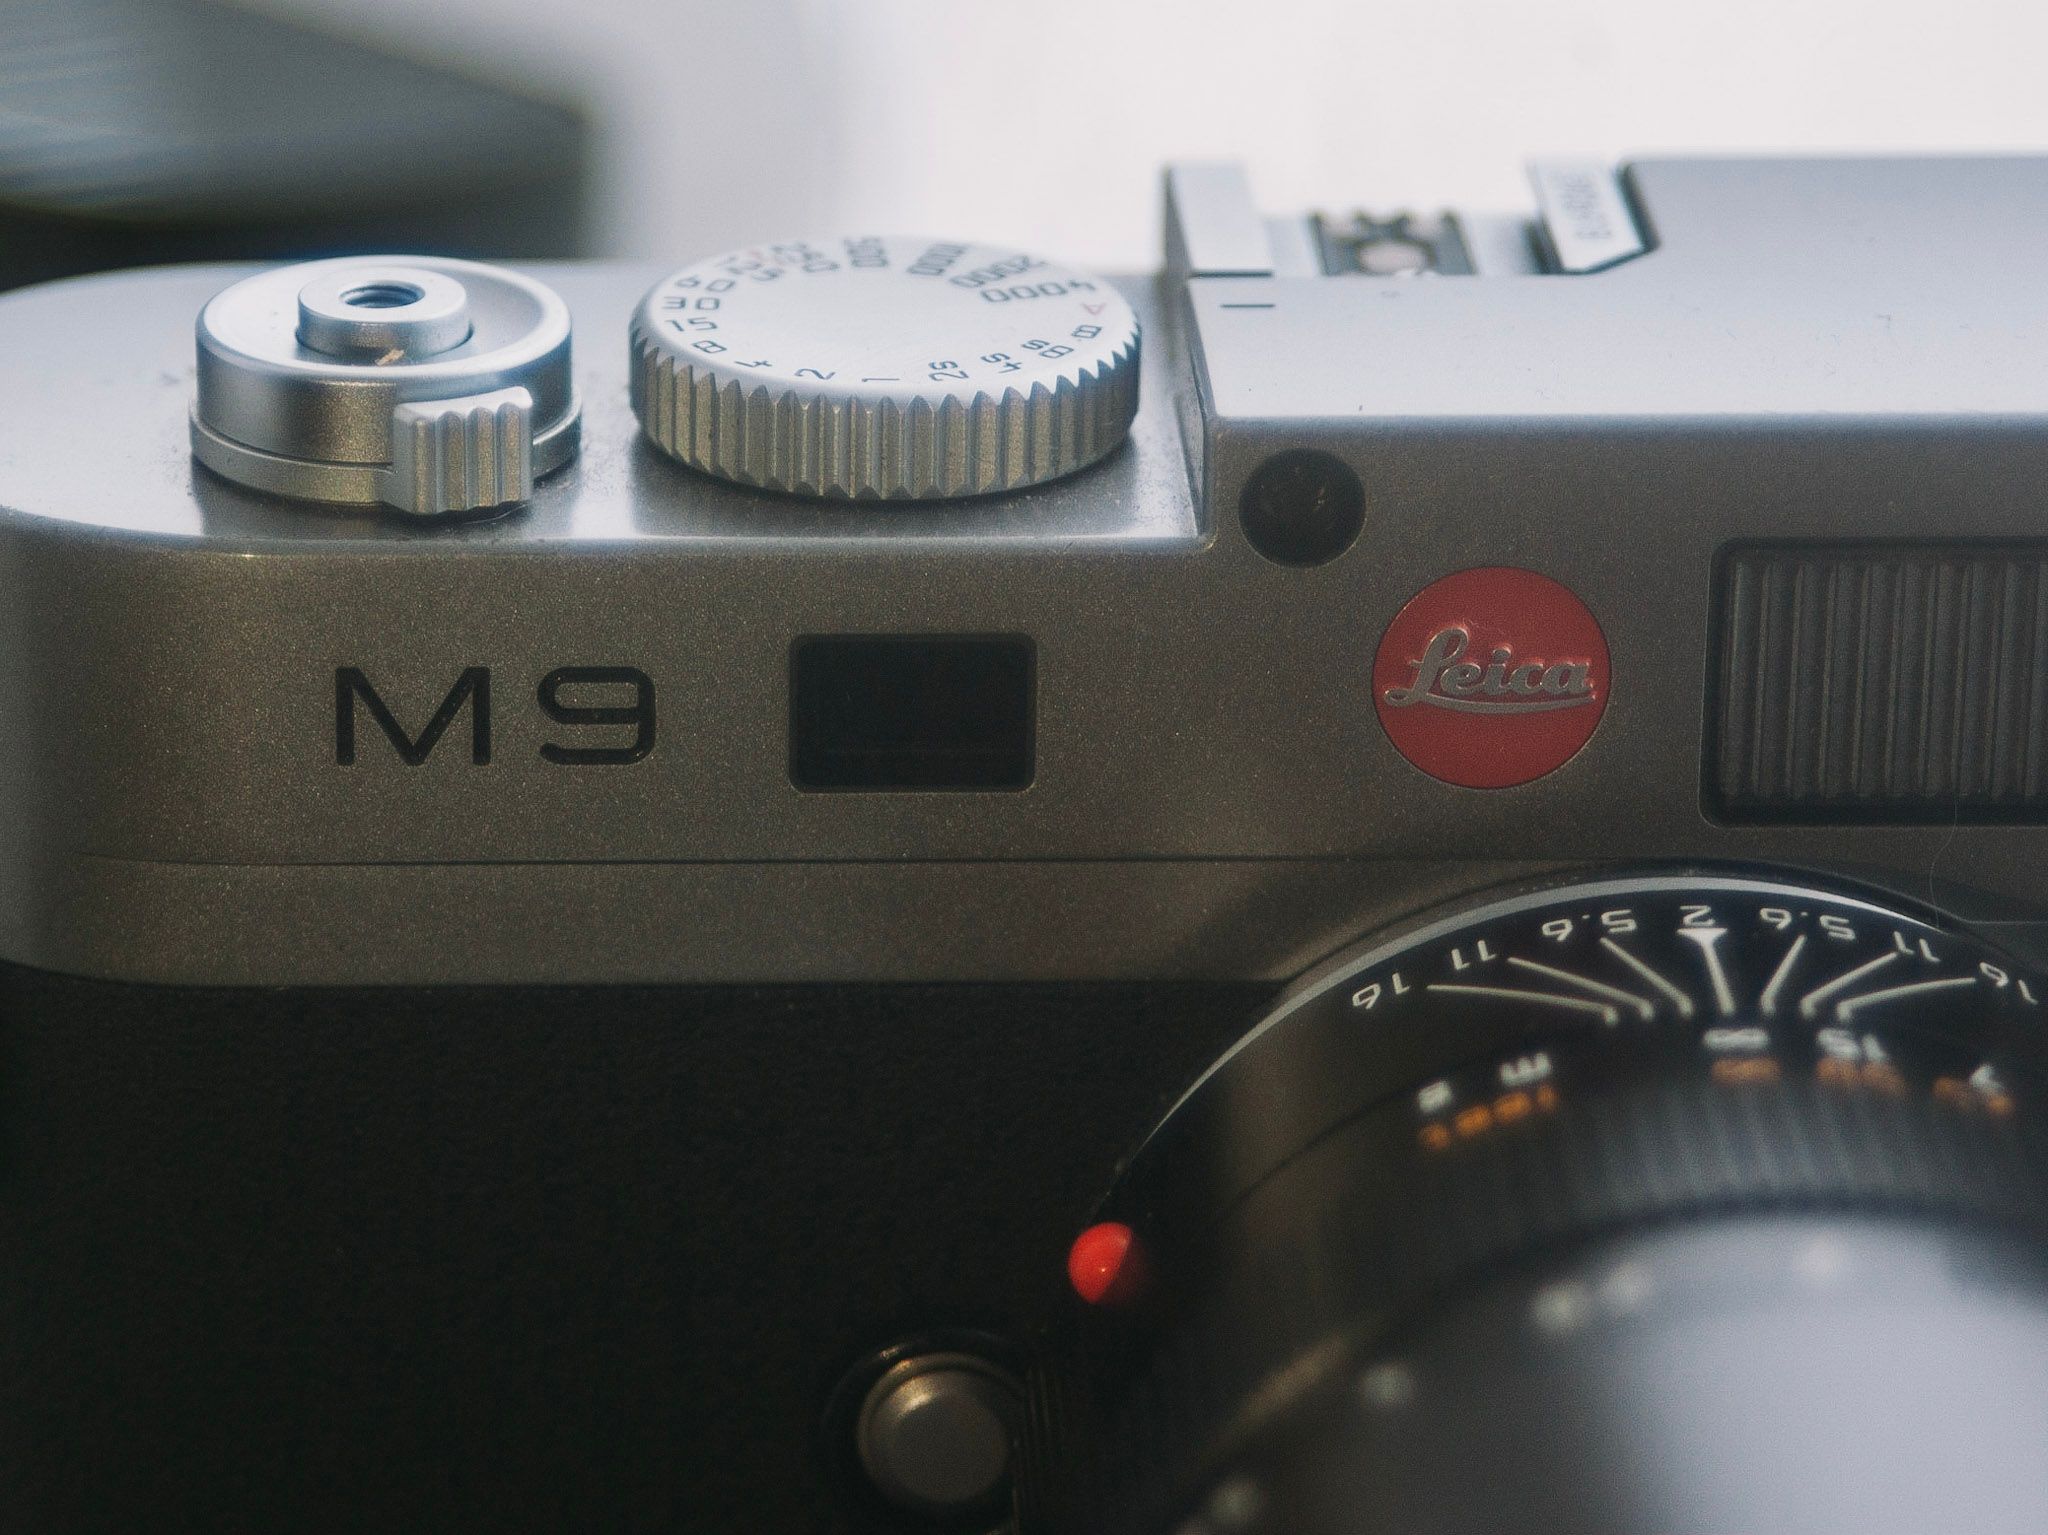 Leica Releases an Affordable Camera, Almost: The M-E (Type 240)